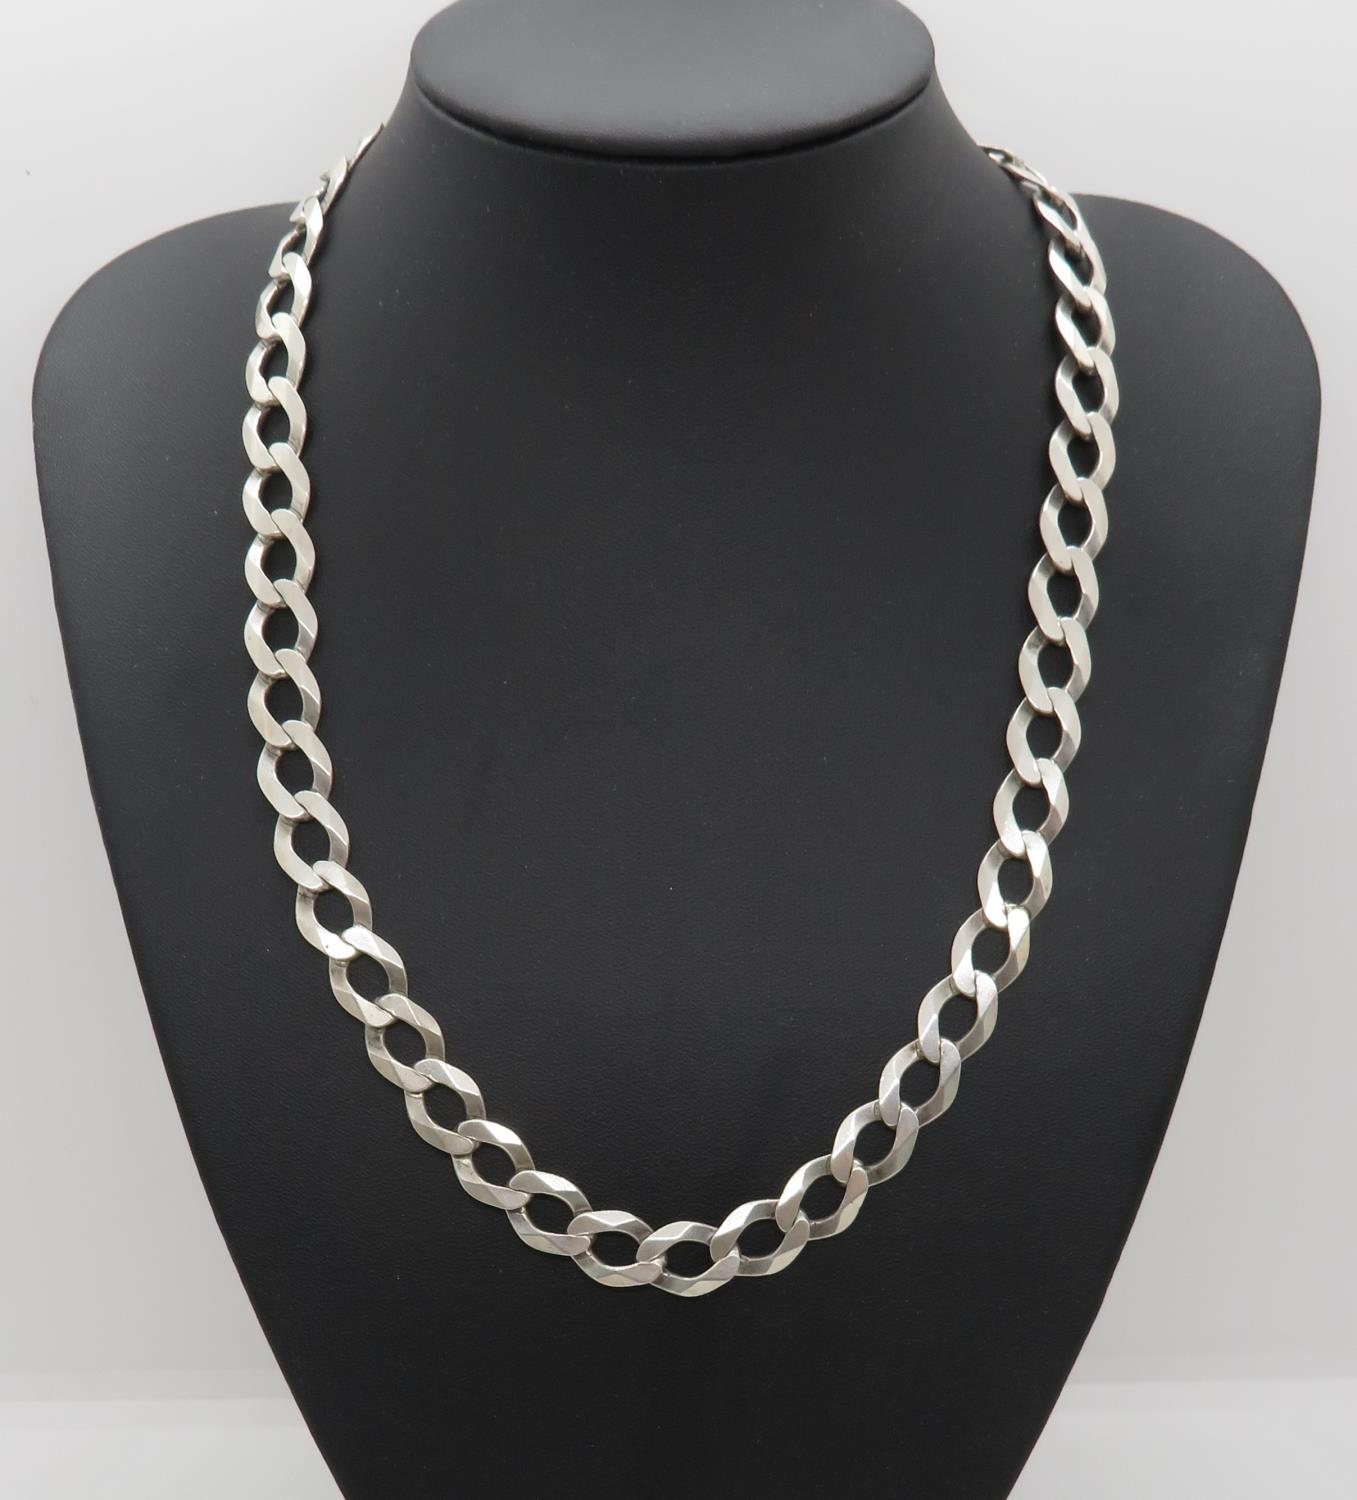 Silver chunky necklace 20" 54g